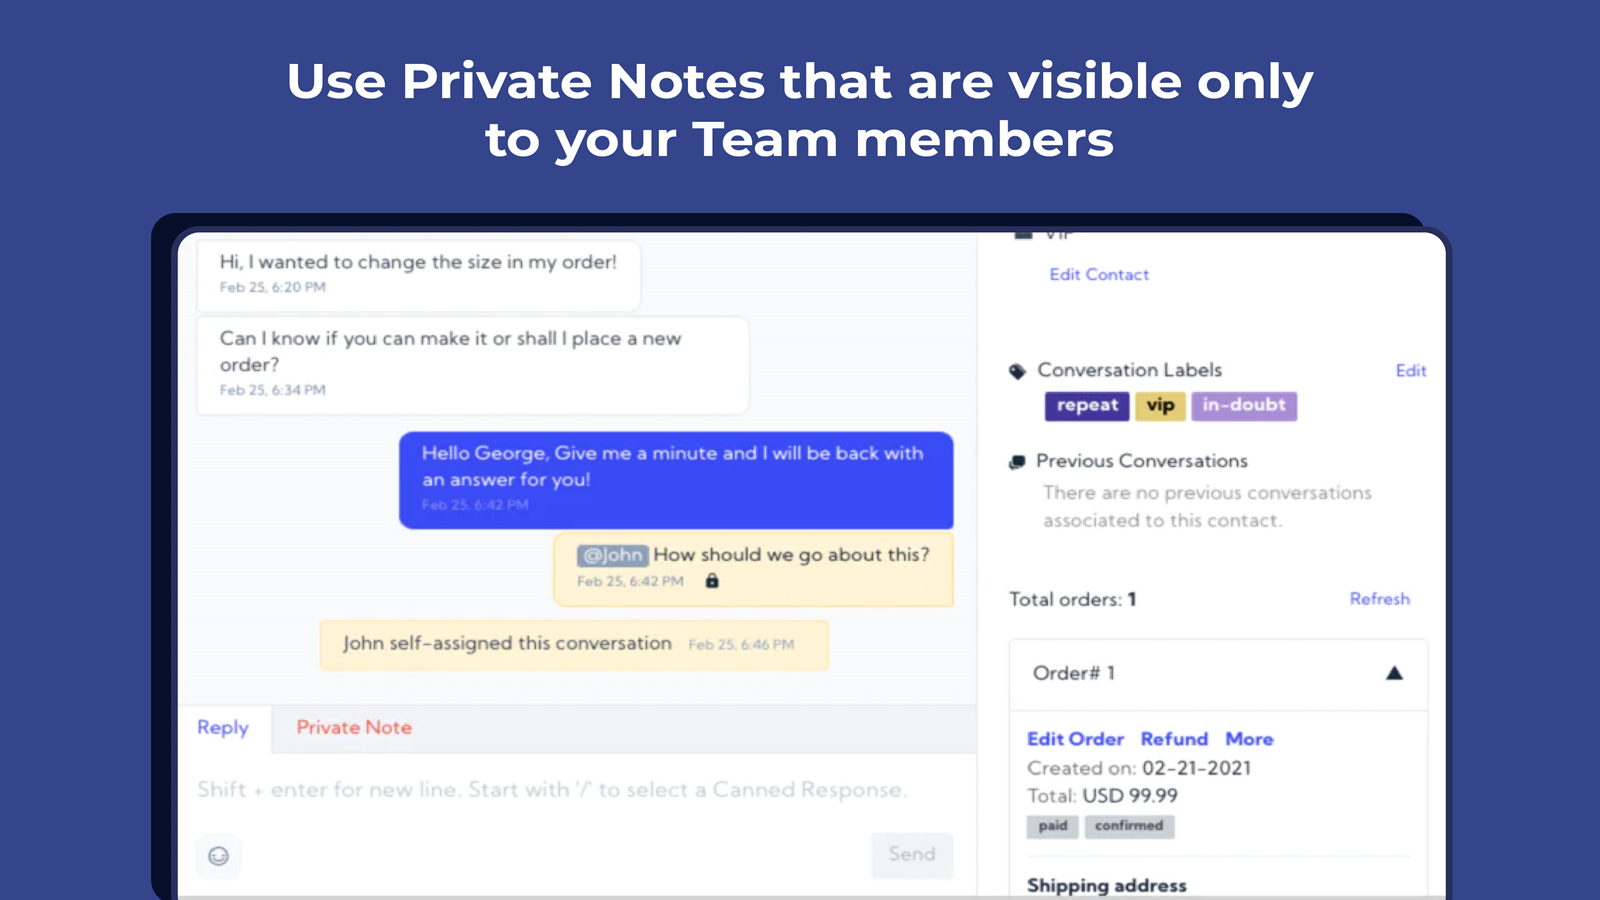 Merchant can communicate and forward tasks as notes to members